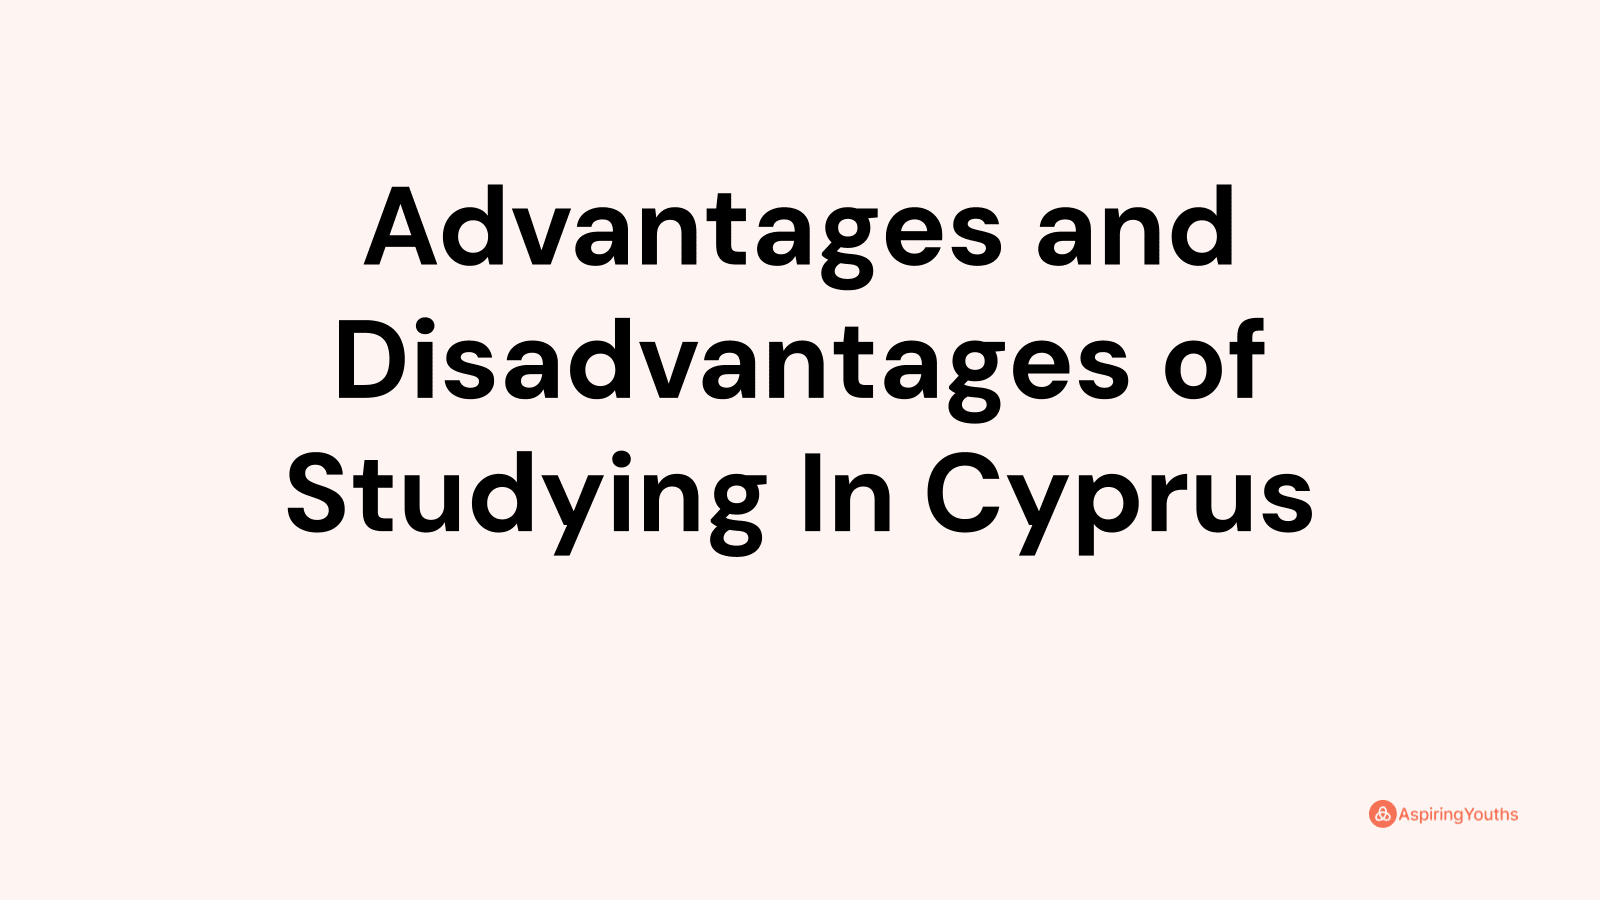 Advantages and disadvantages of Studying In Cyprus